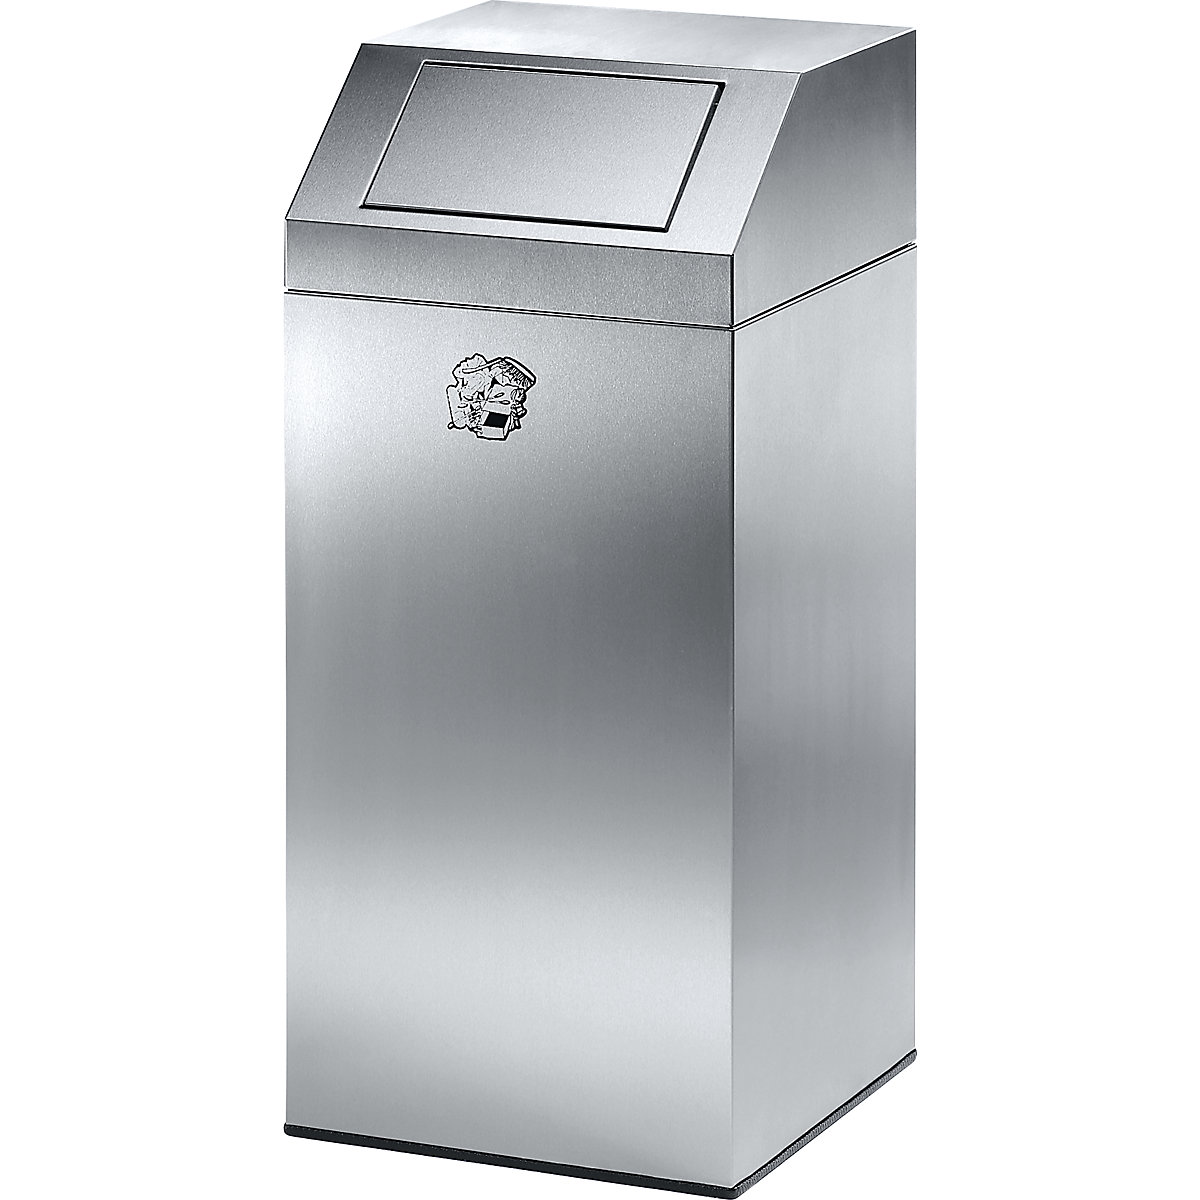 Stainless steel waste collector, for indoor and outdoor use - VAR